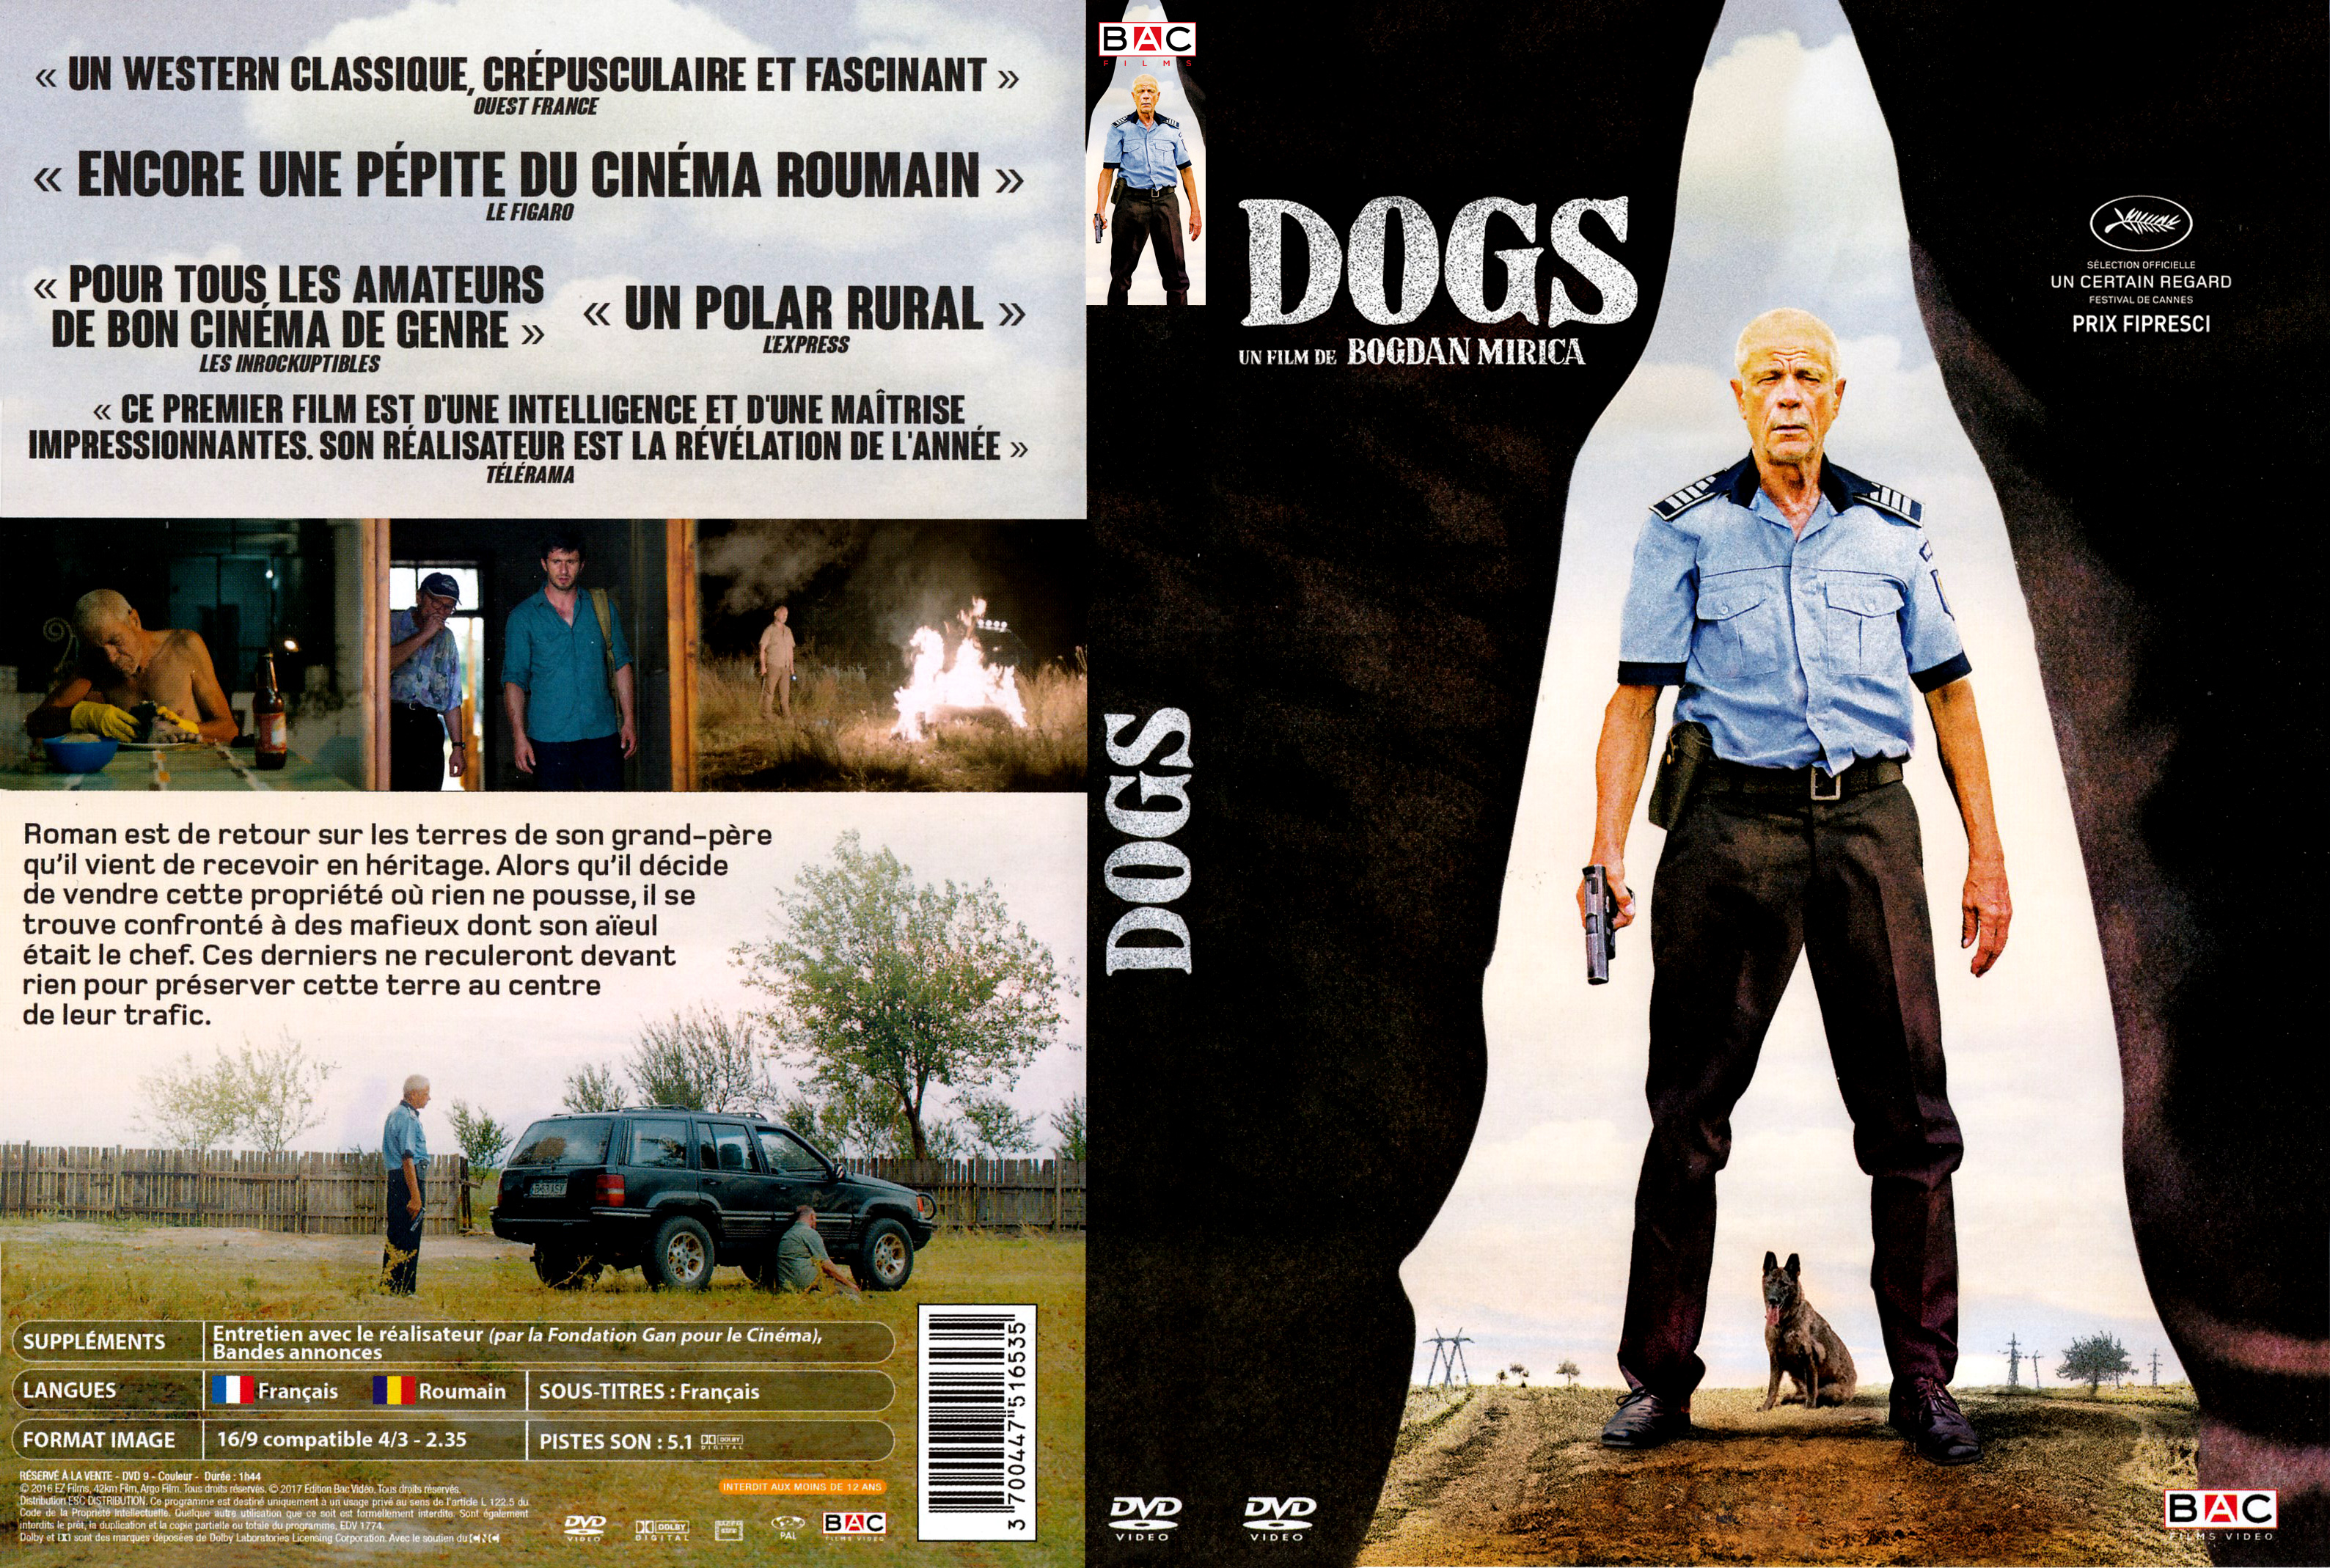 Jaquette DVD Dogs (2016)